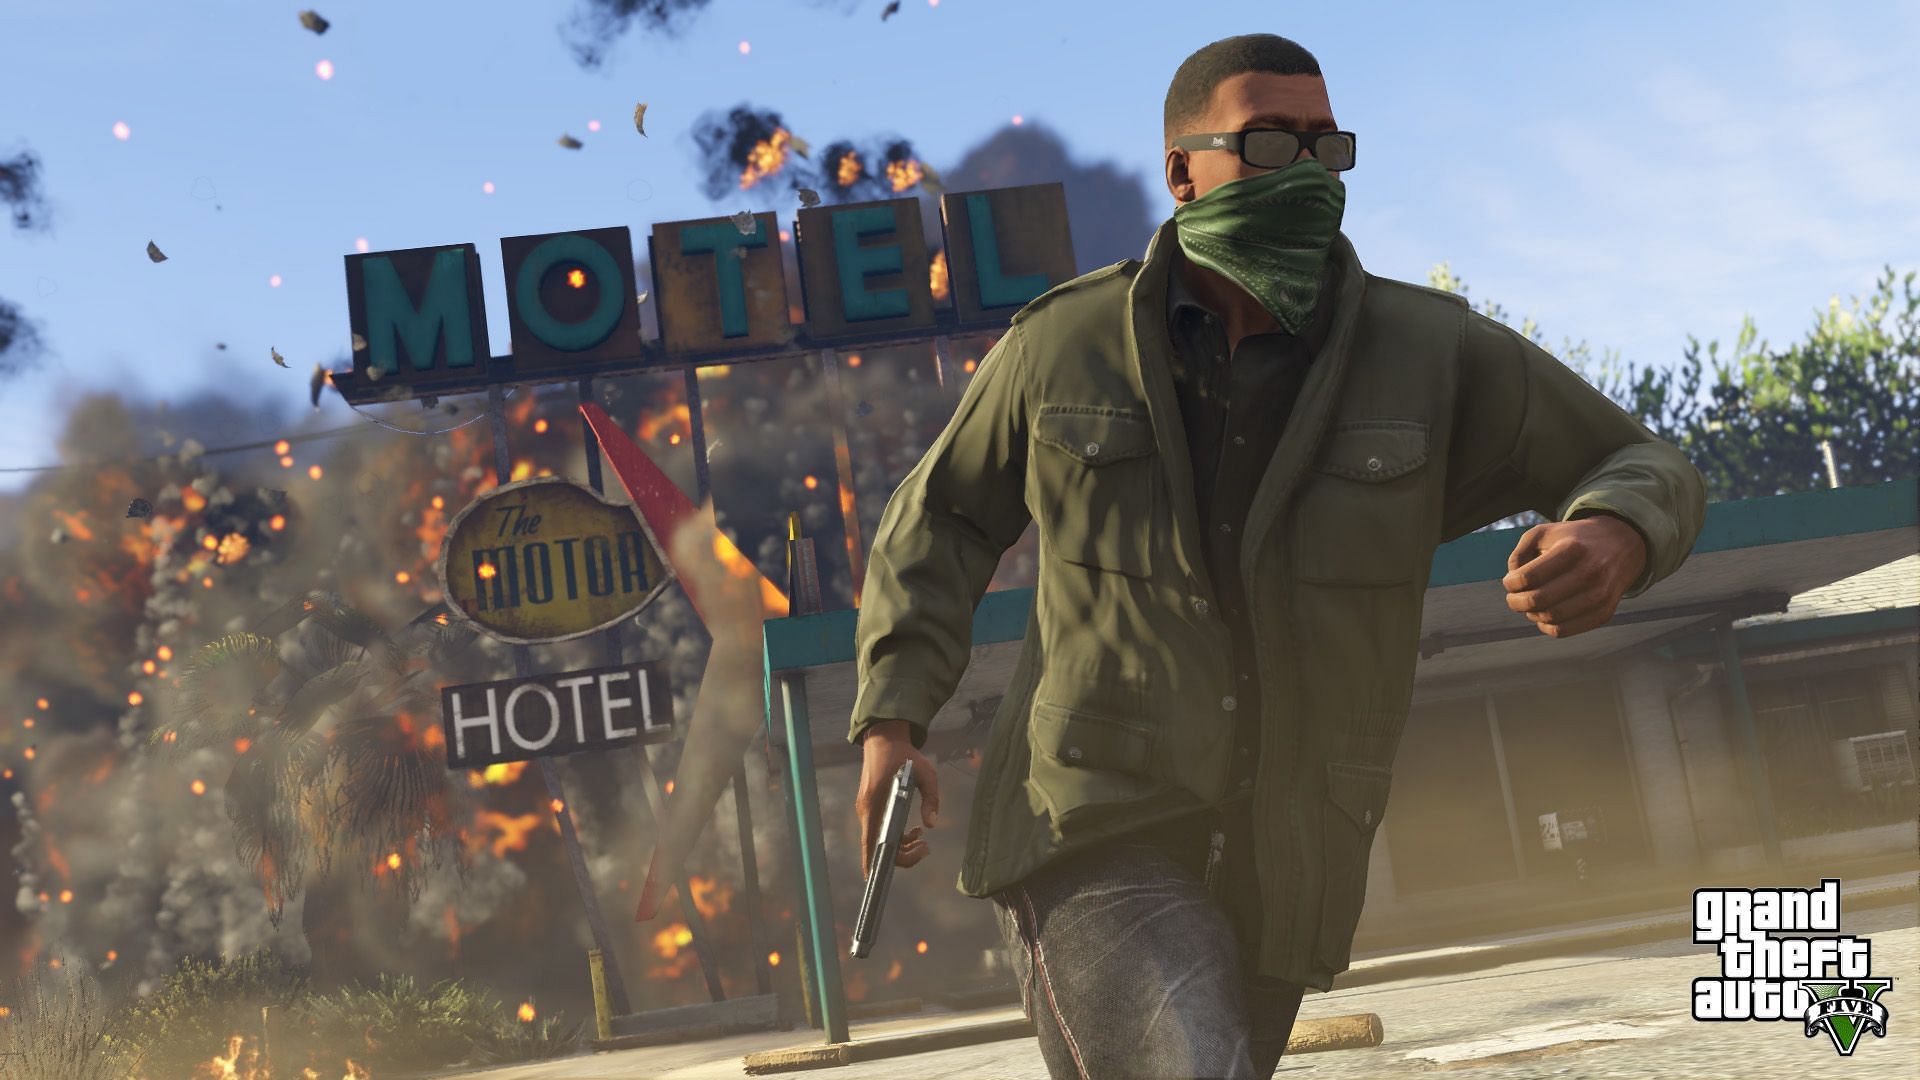 GTA Online insider believes Rockstar may end support for PS4 after PS5's  boosted sales